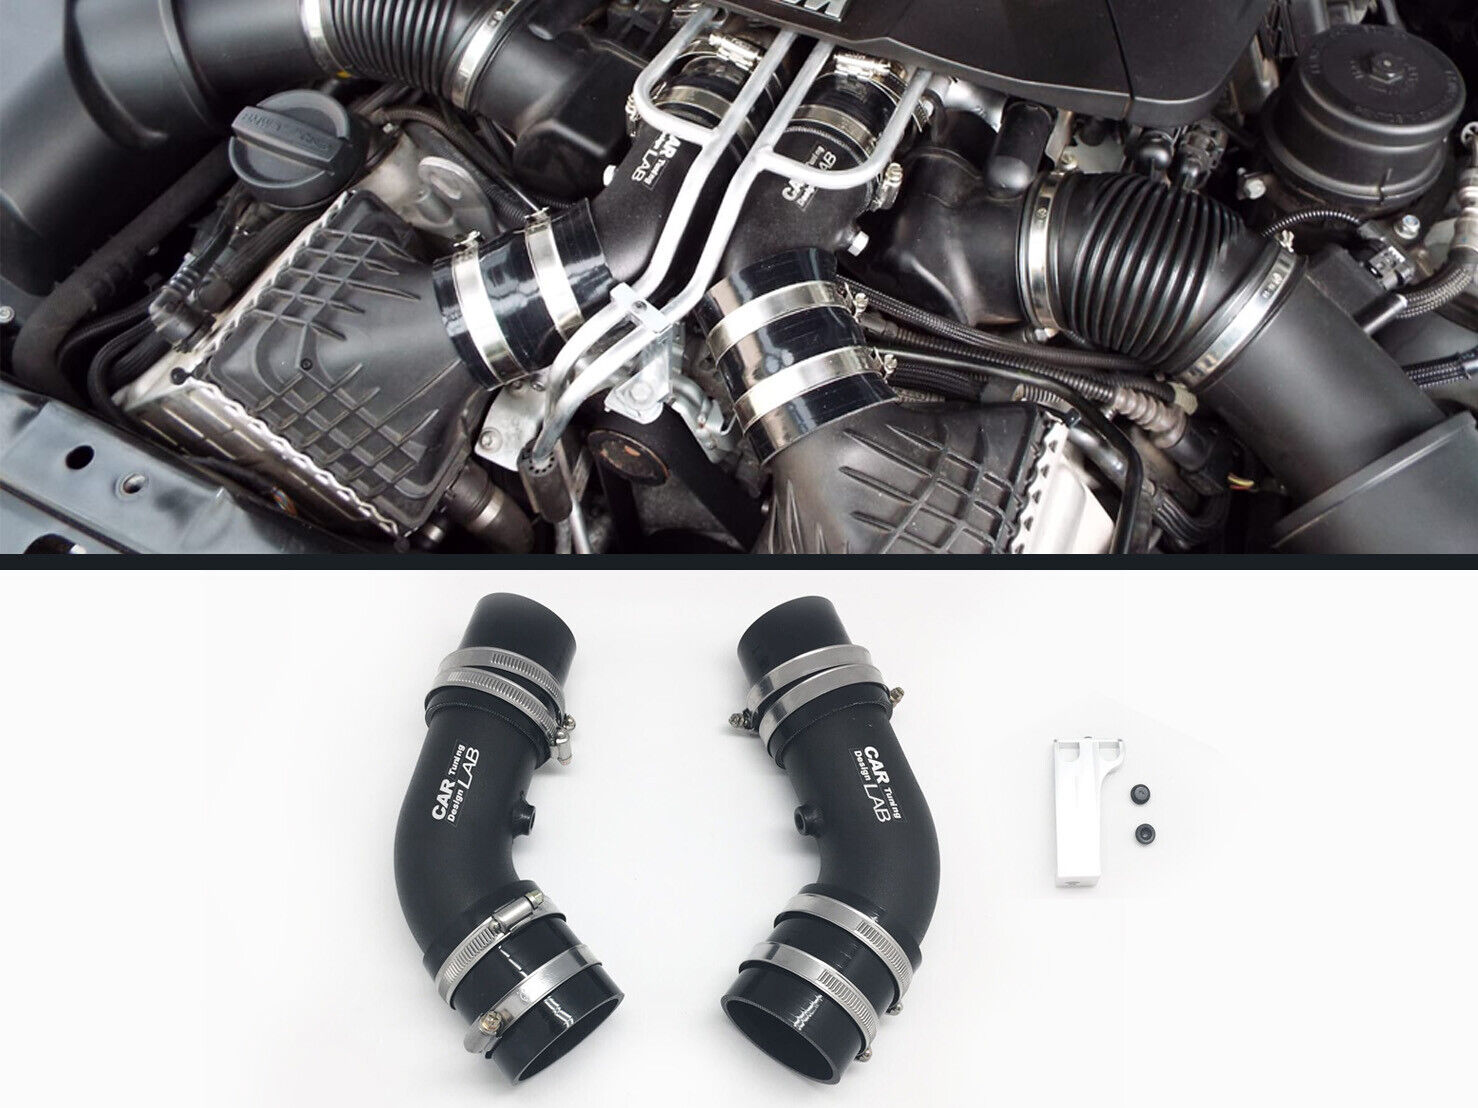 Turbo Intake Charge Pipe Cooling kit For BMW F10 F11 F12 F13 M5 M6 Motor 